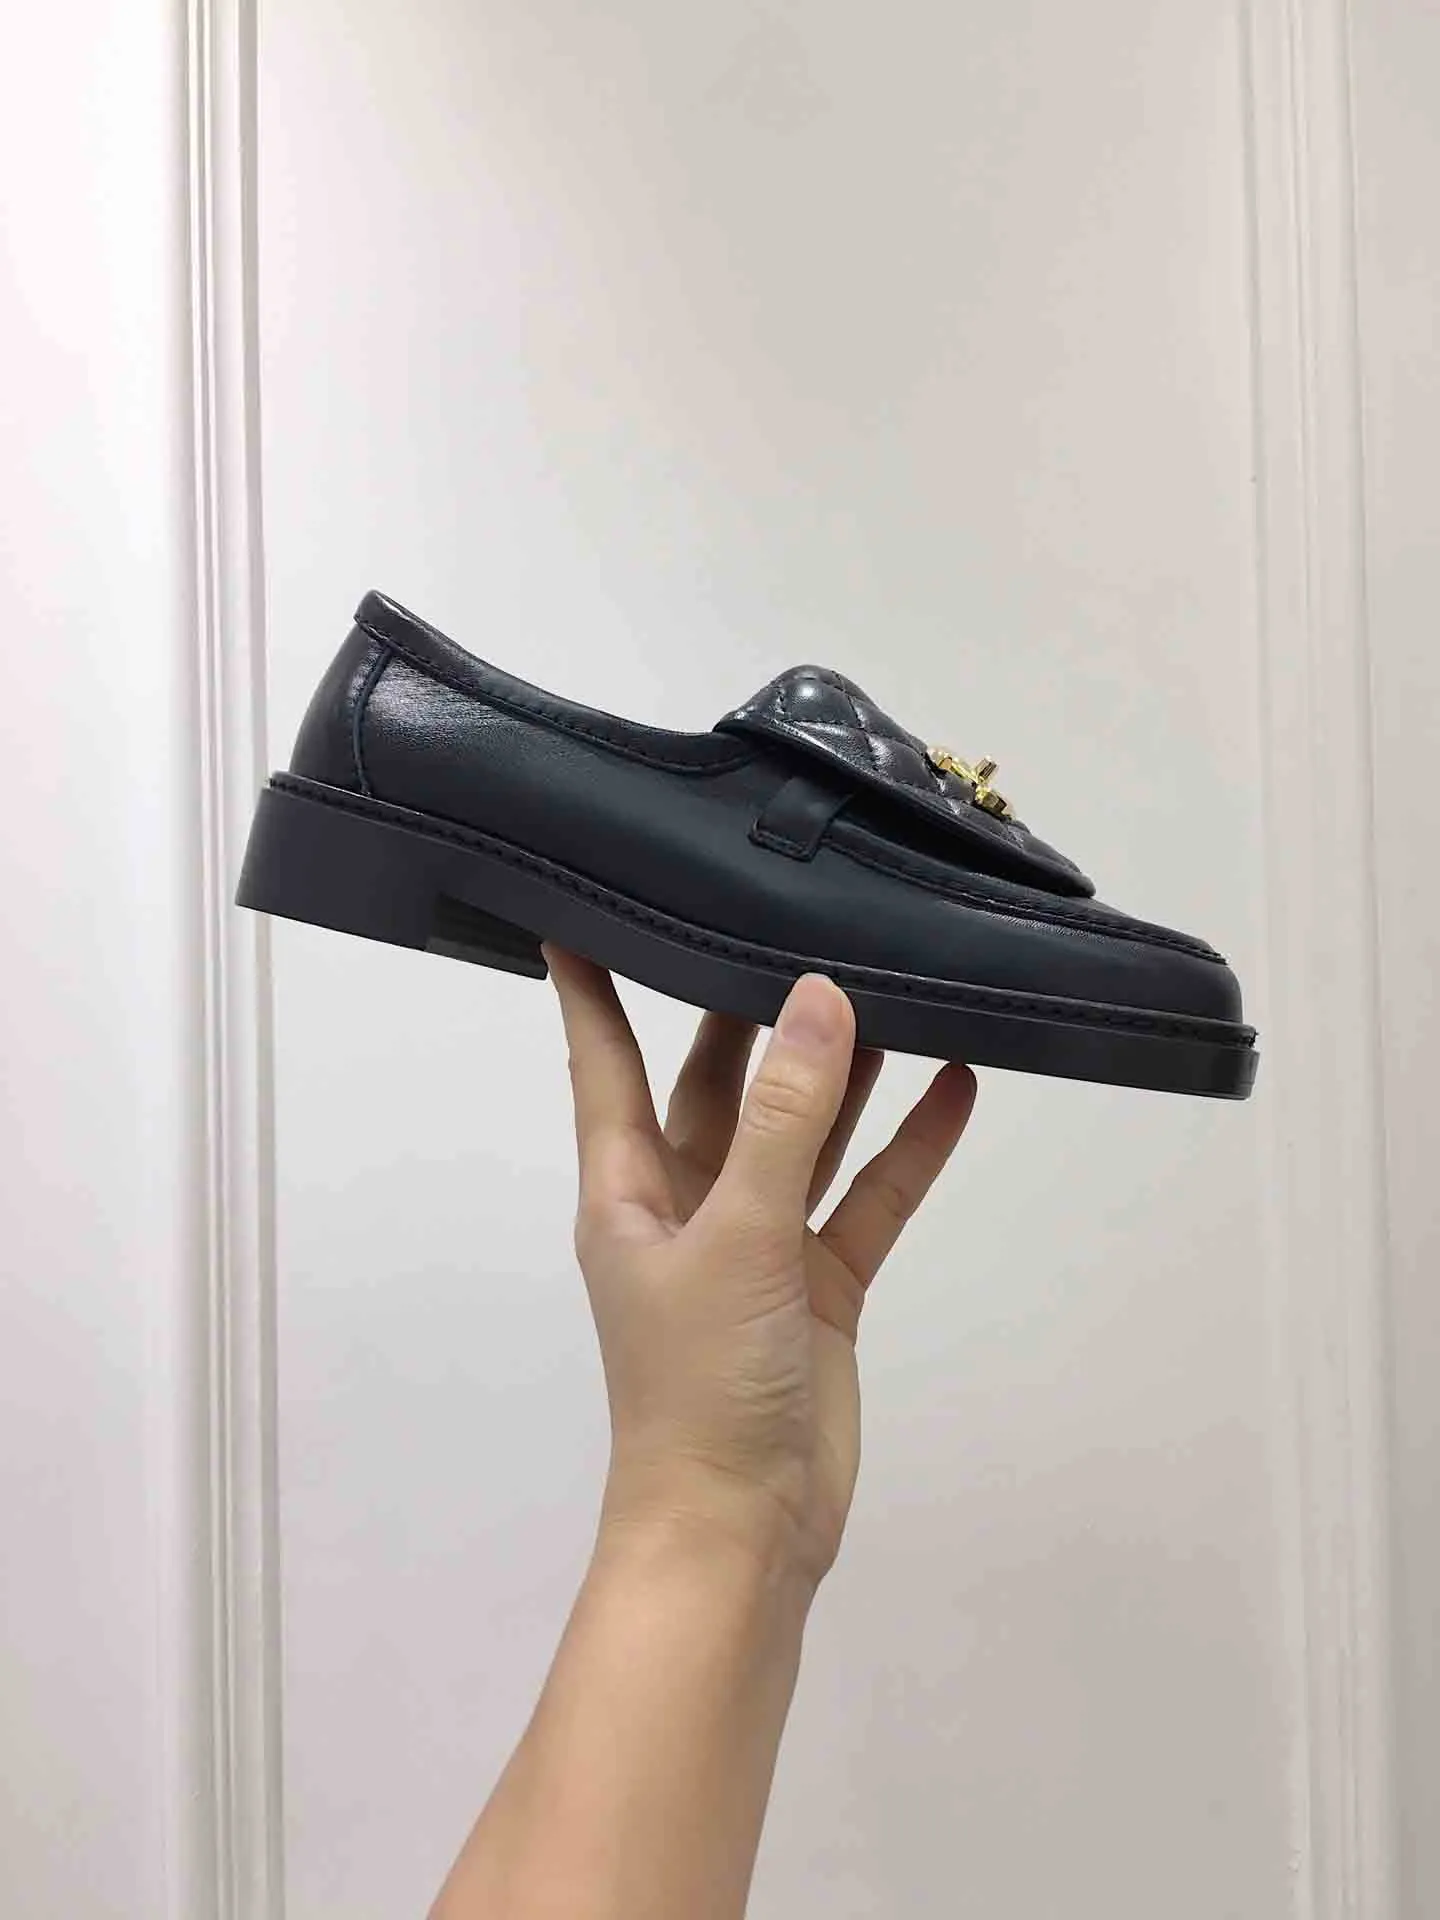 2021 new good quality designer Loafers Spring new designer fashion loafer shoes Spring luxury casual shoes